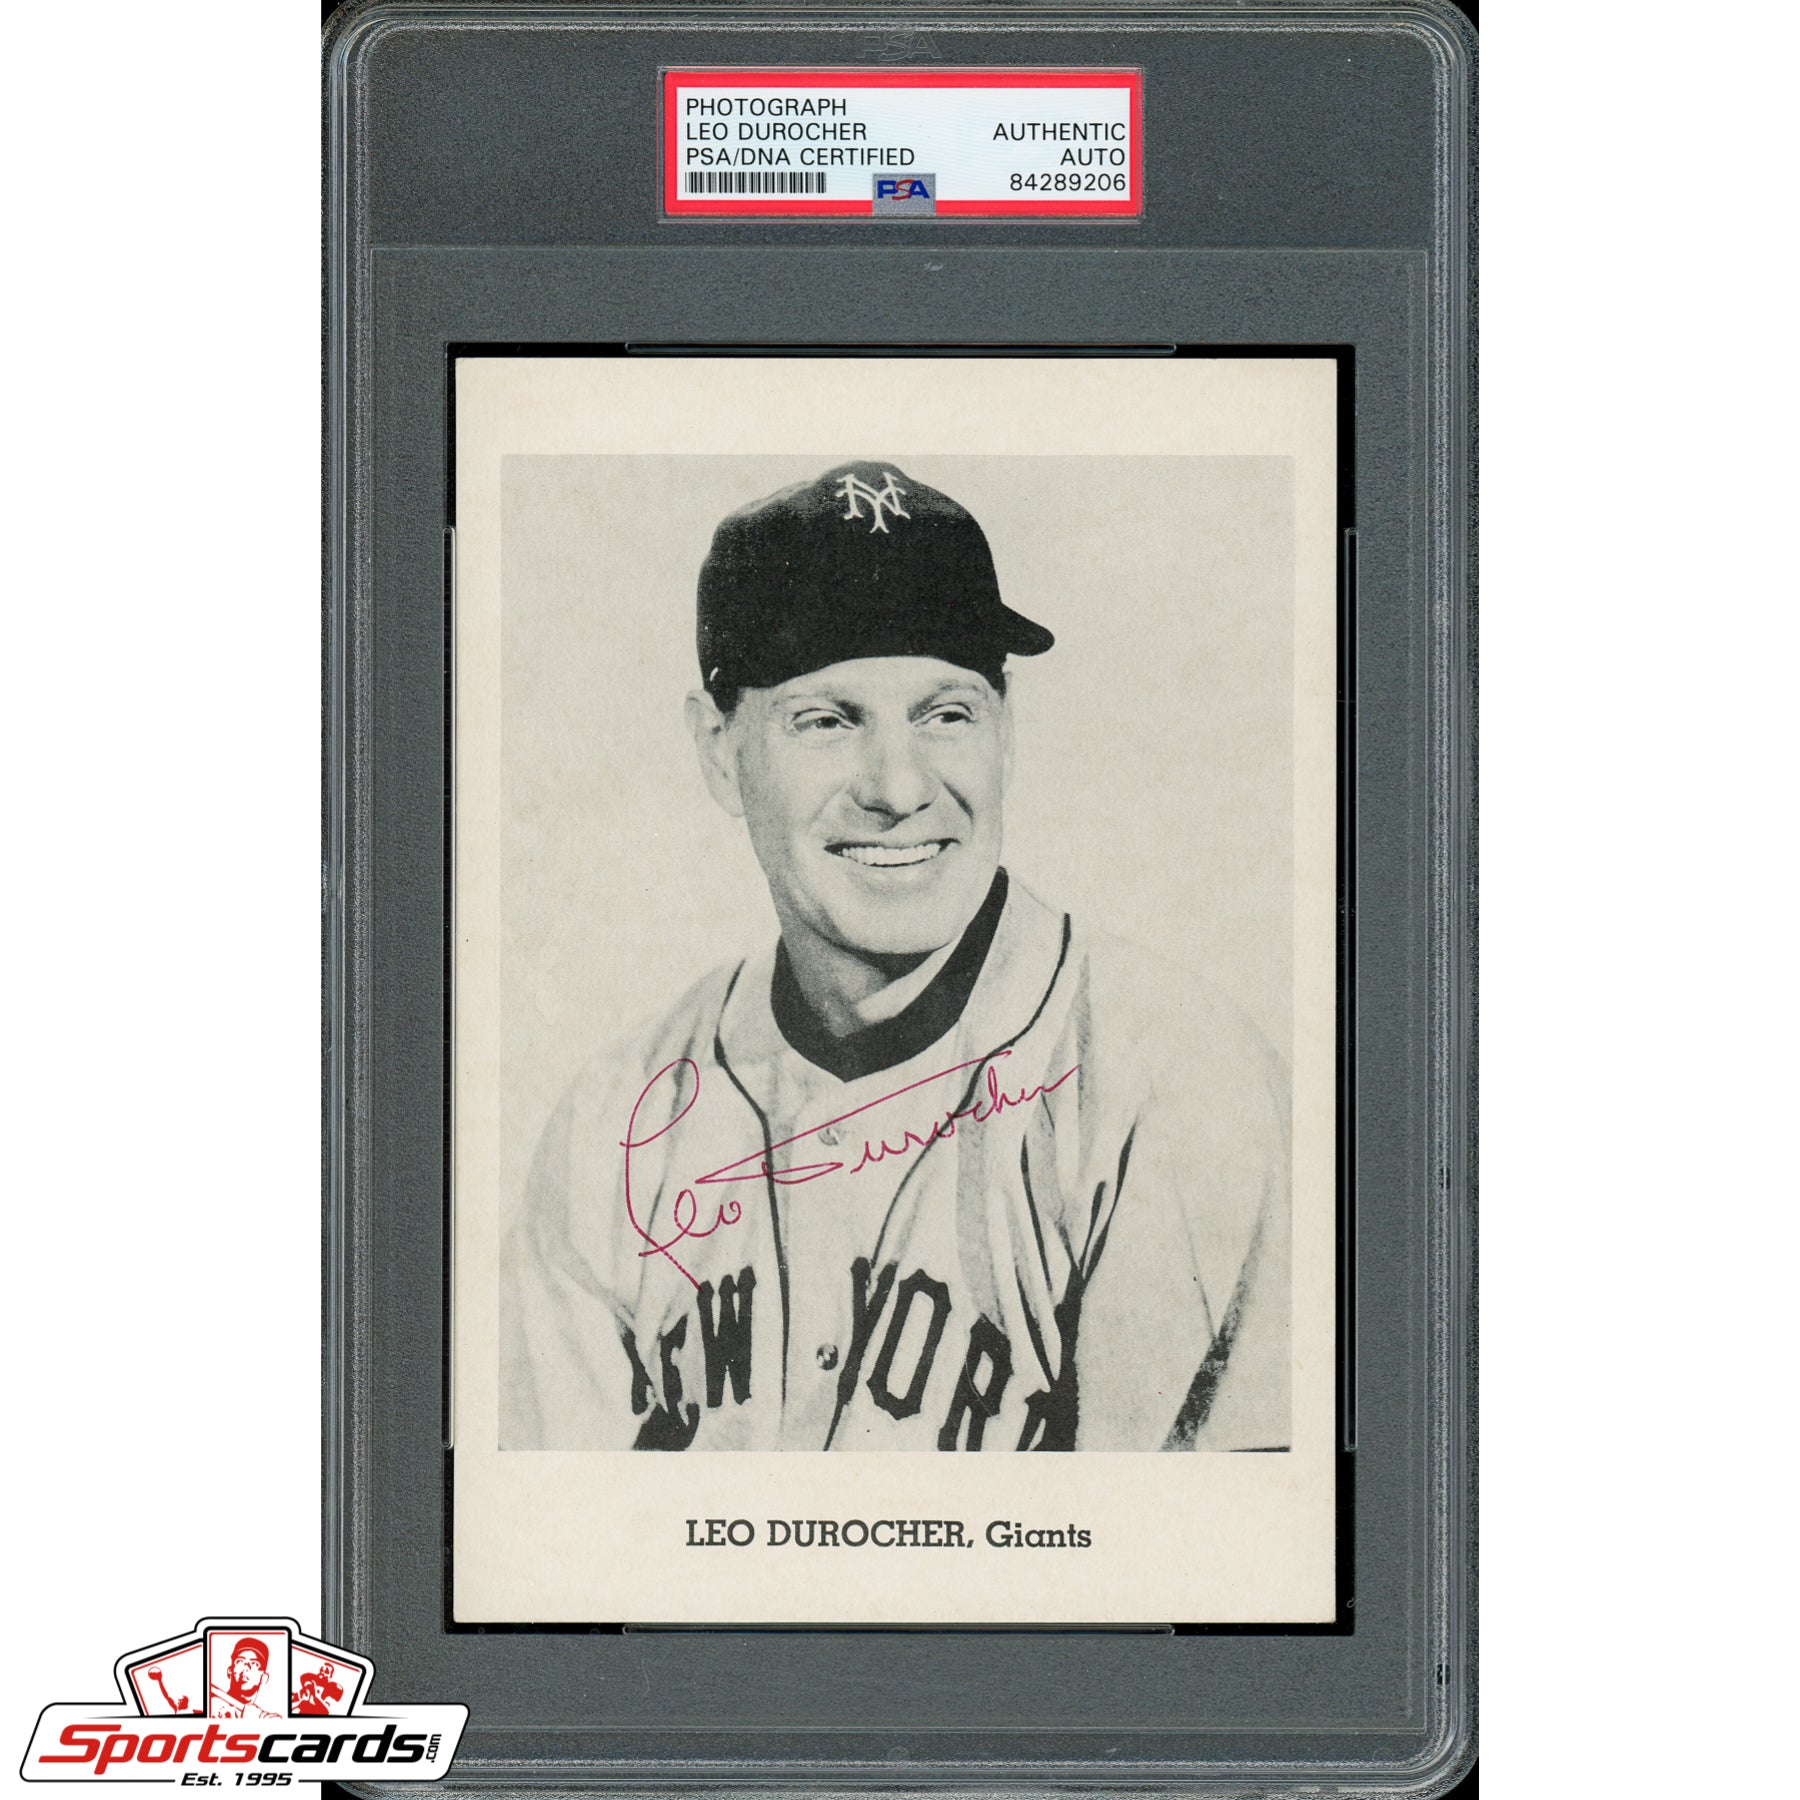 Leo Durocher Signed Autographed Team Issued New York Giants Photo PSA/DNA